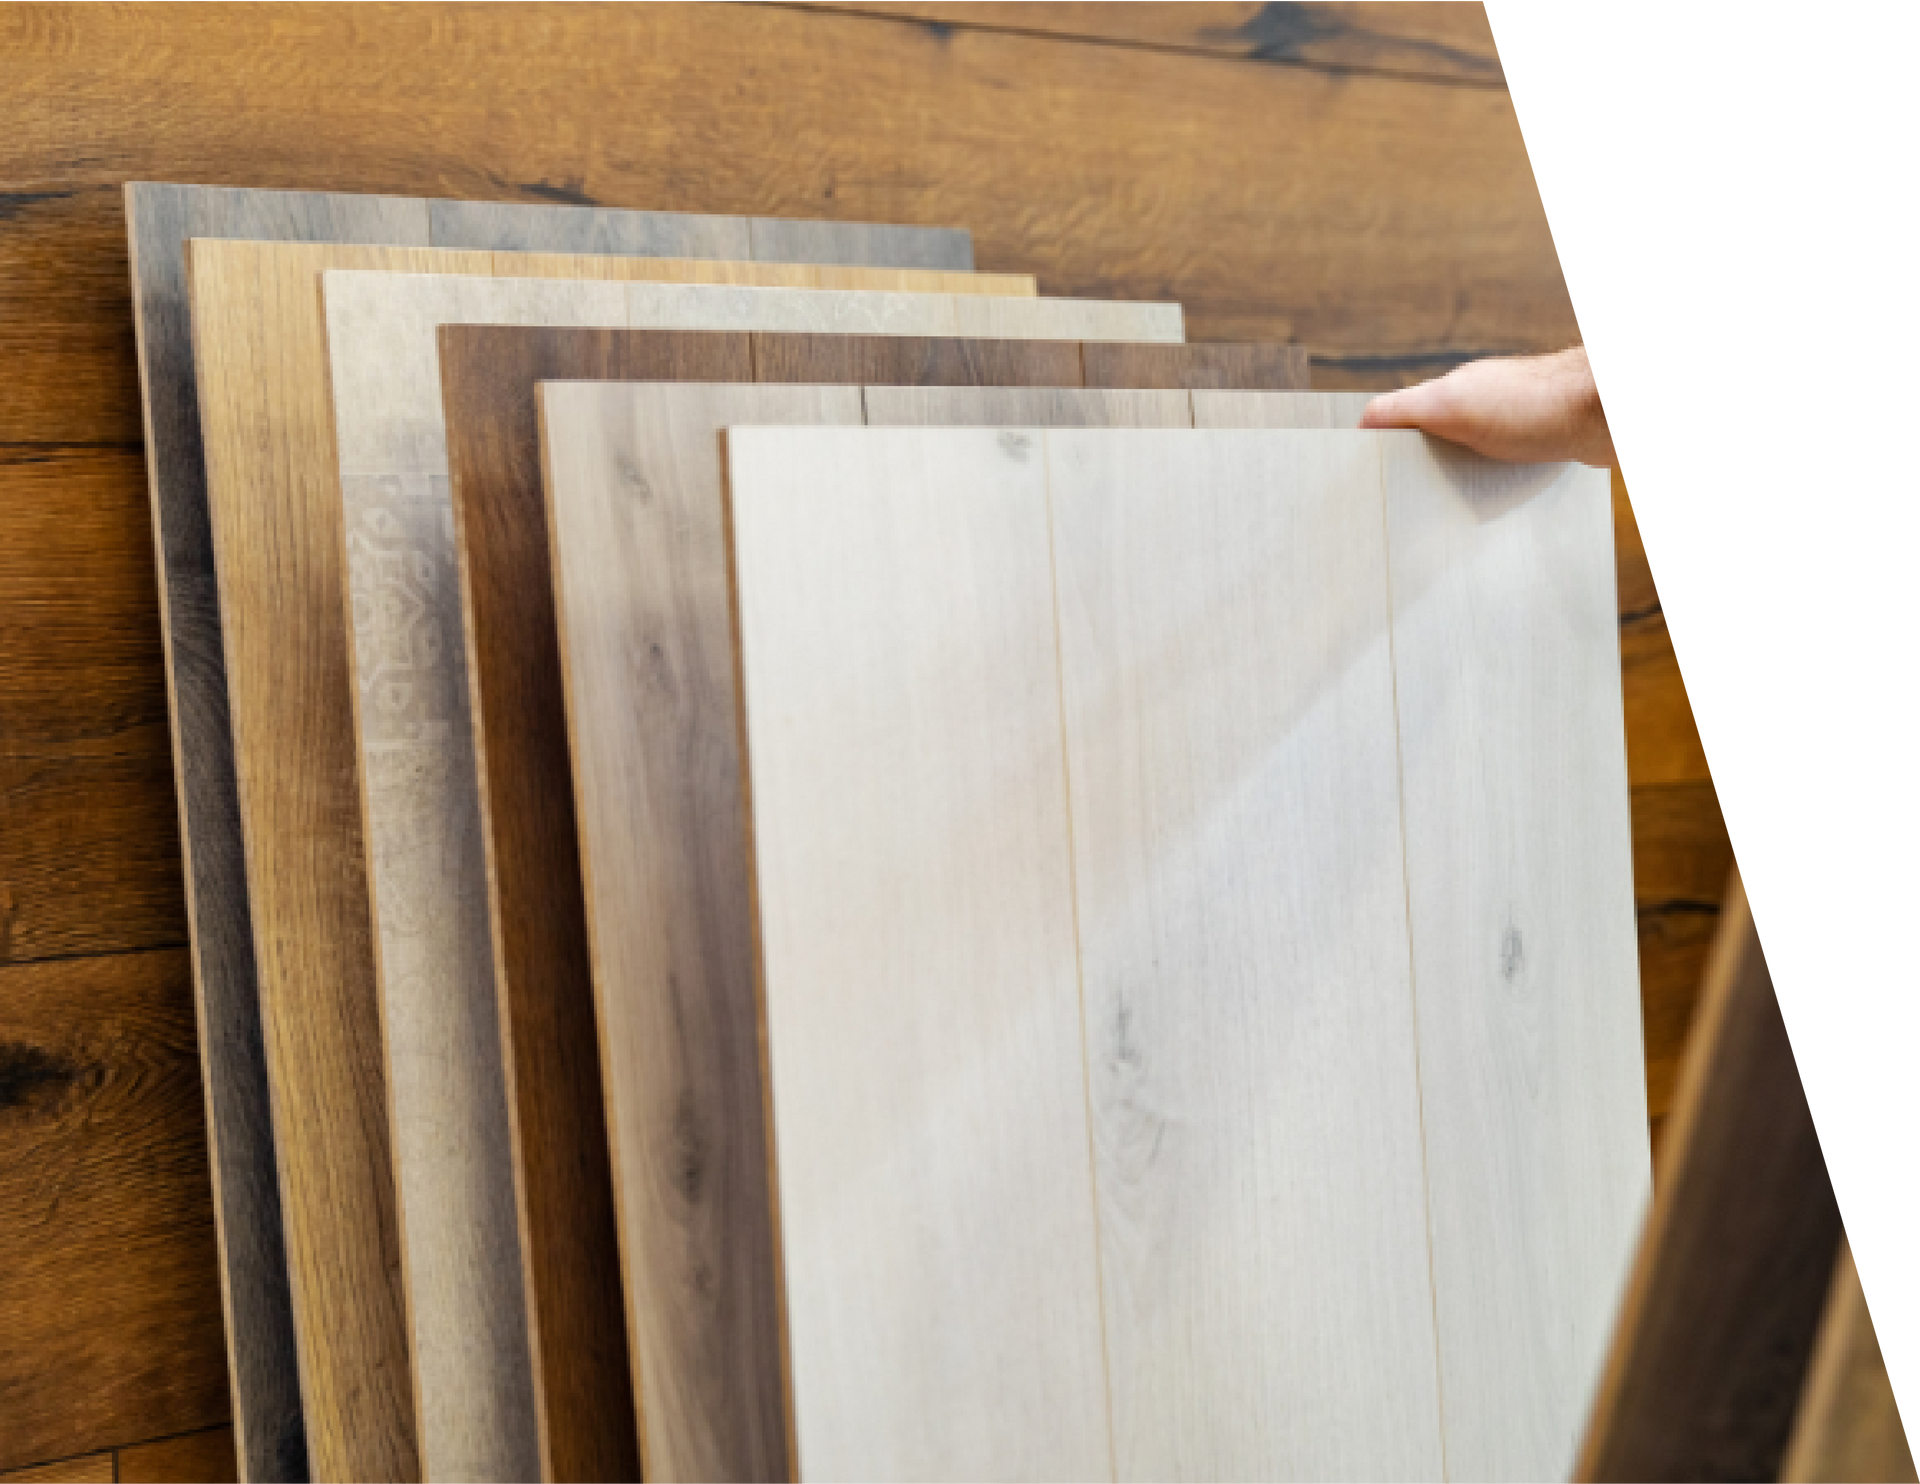 A person is pointing at a stack of wooden boards